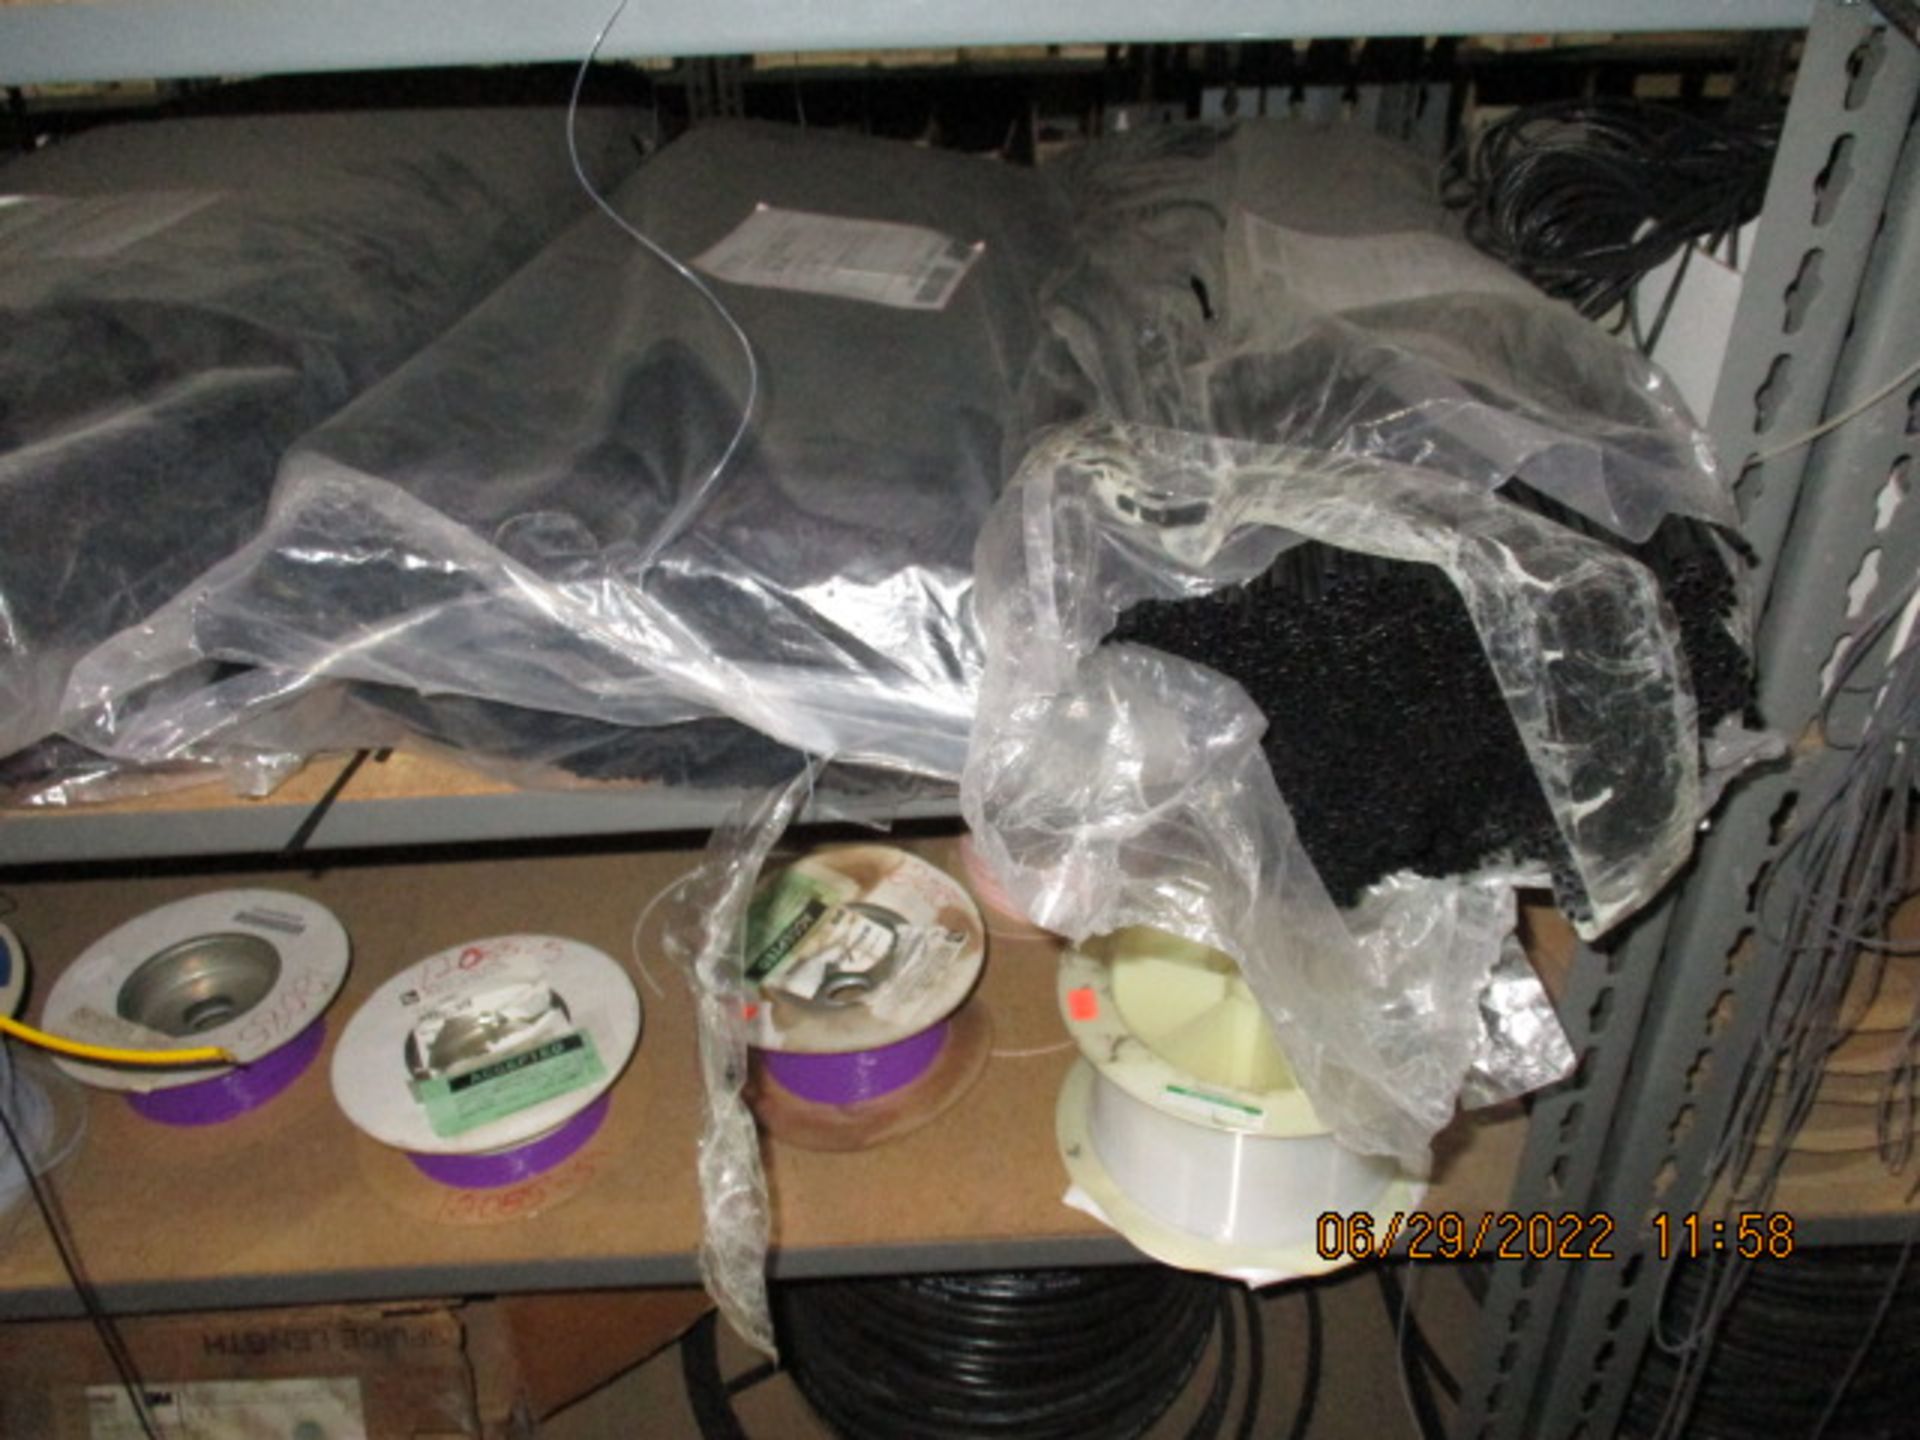 CONTENTS OF SHELVING UNIT CONSISTING OF ASSORTMENT OF TUBING AND HEATSINKS - Image 13 of 15